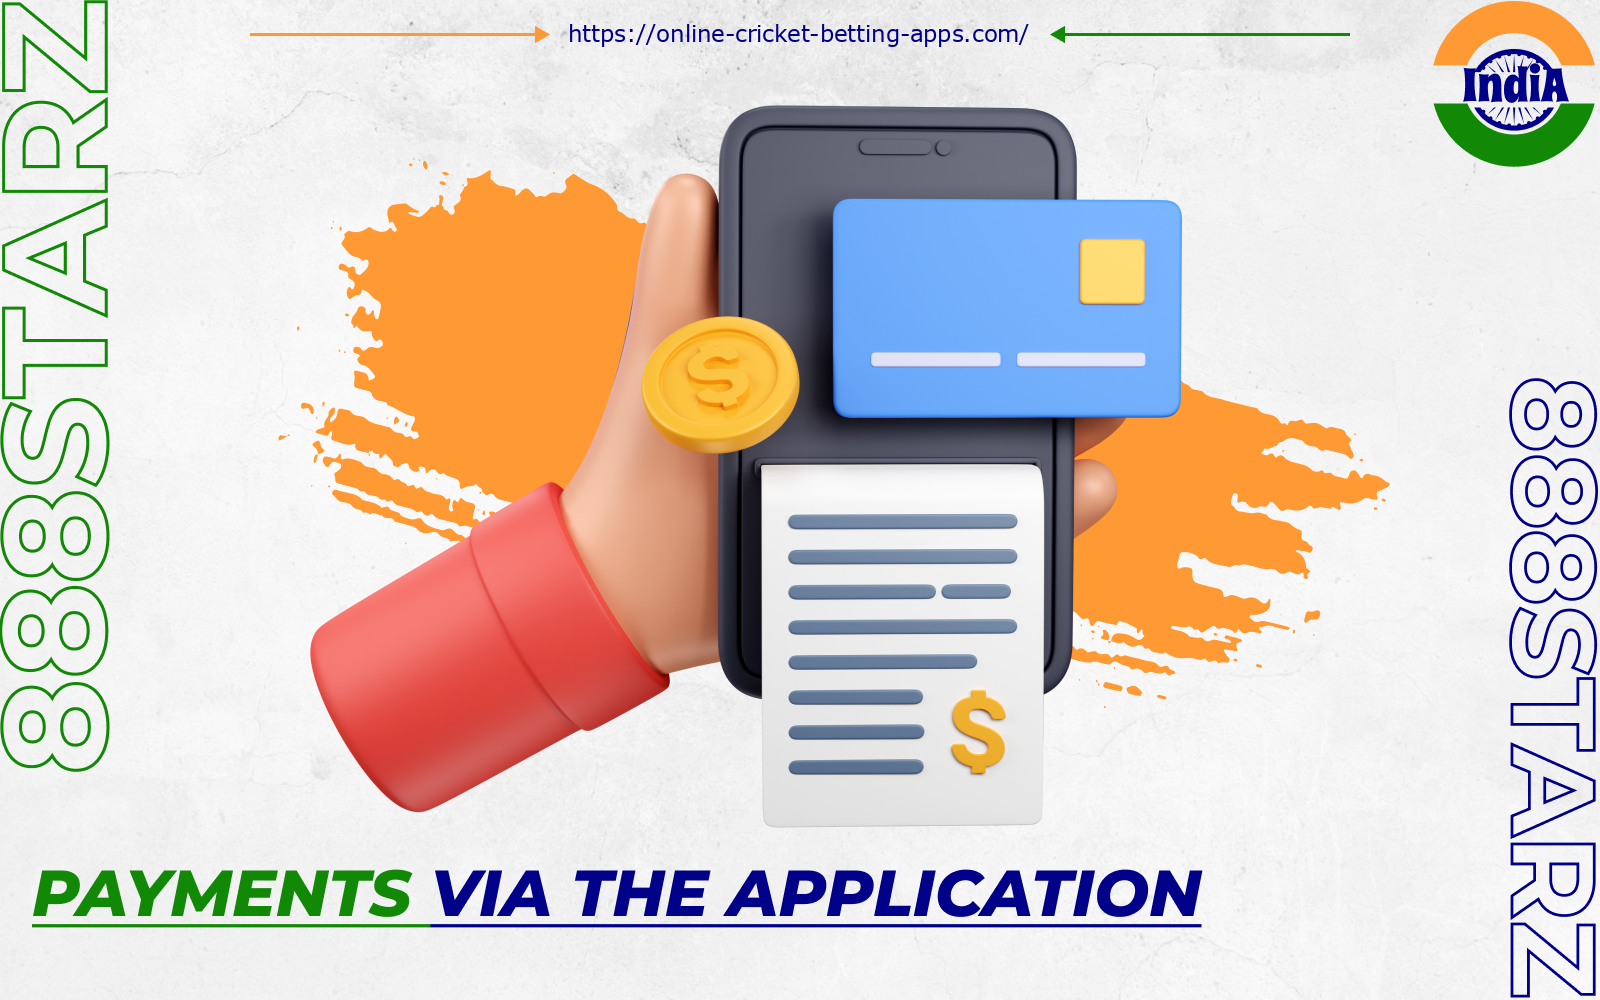 A large number of popular methods have been added to the 888starz app for the convenience of transactions by users from India